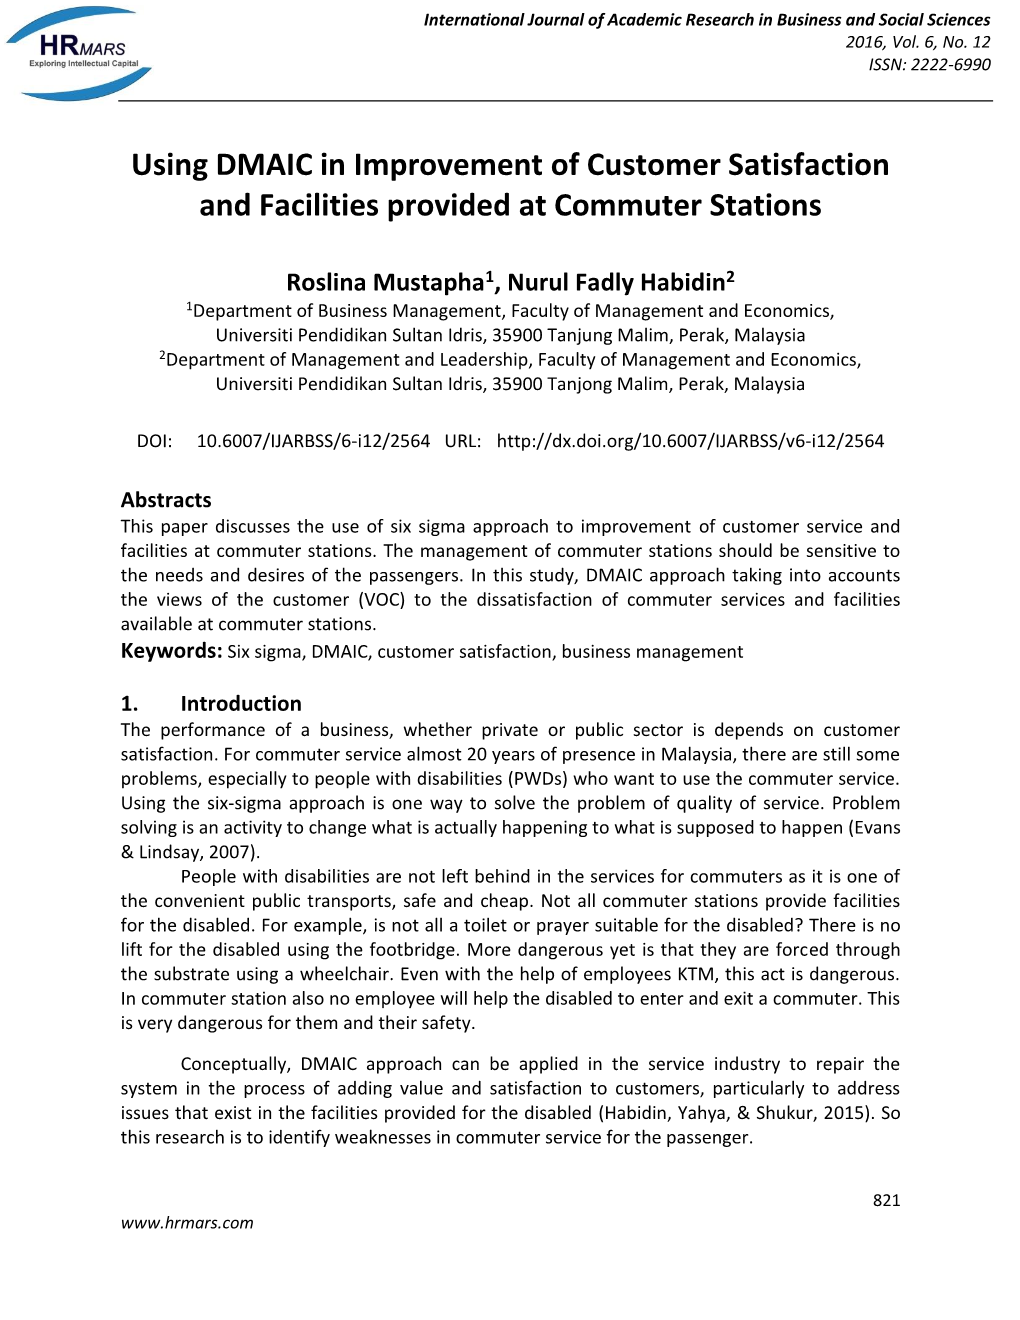 Using DMAIC in Improvement of Customer Satisfaction and Facilities Provided at Commuter Stations